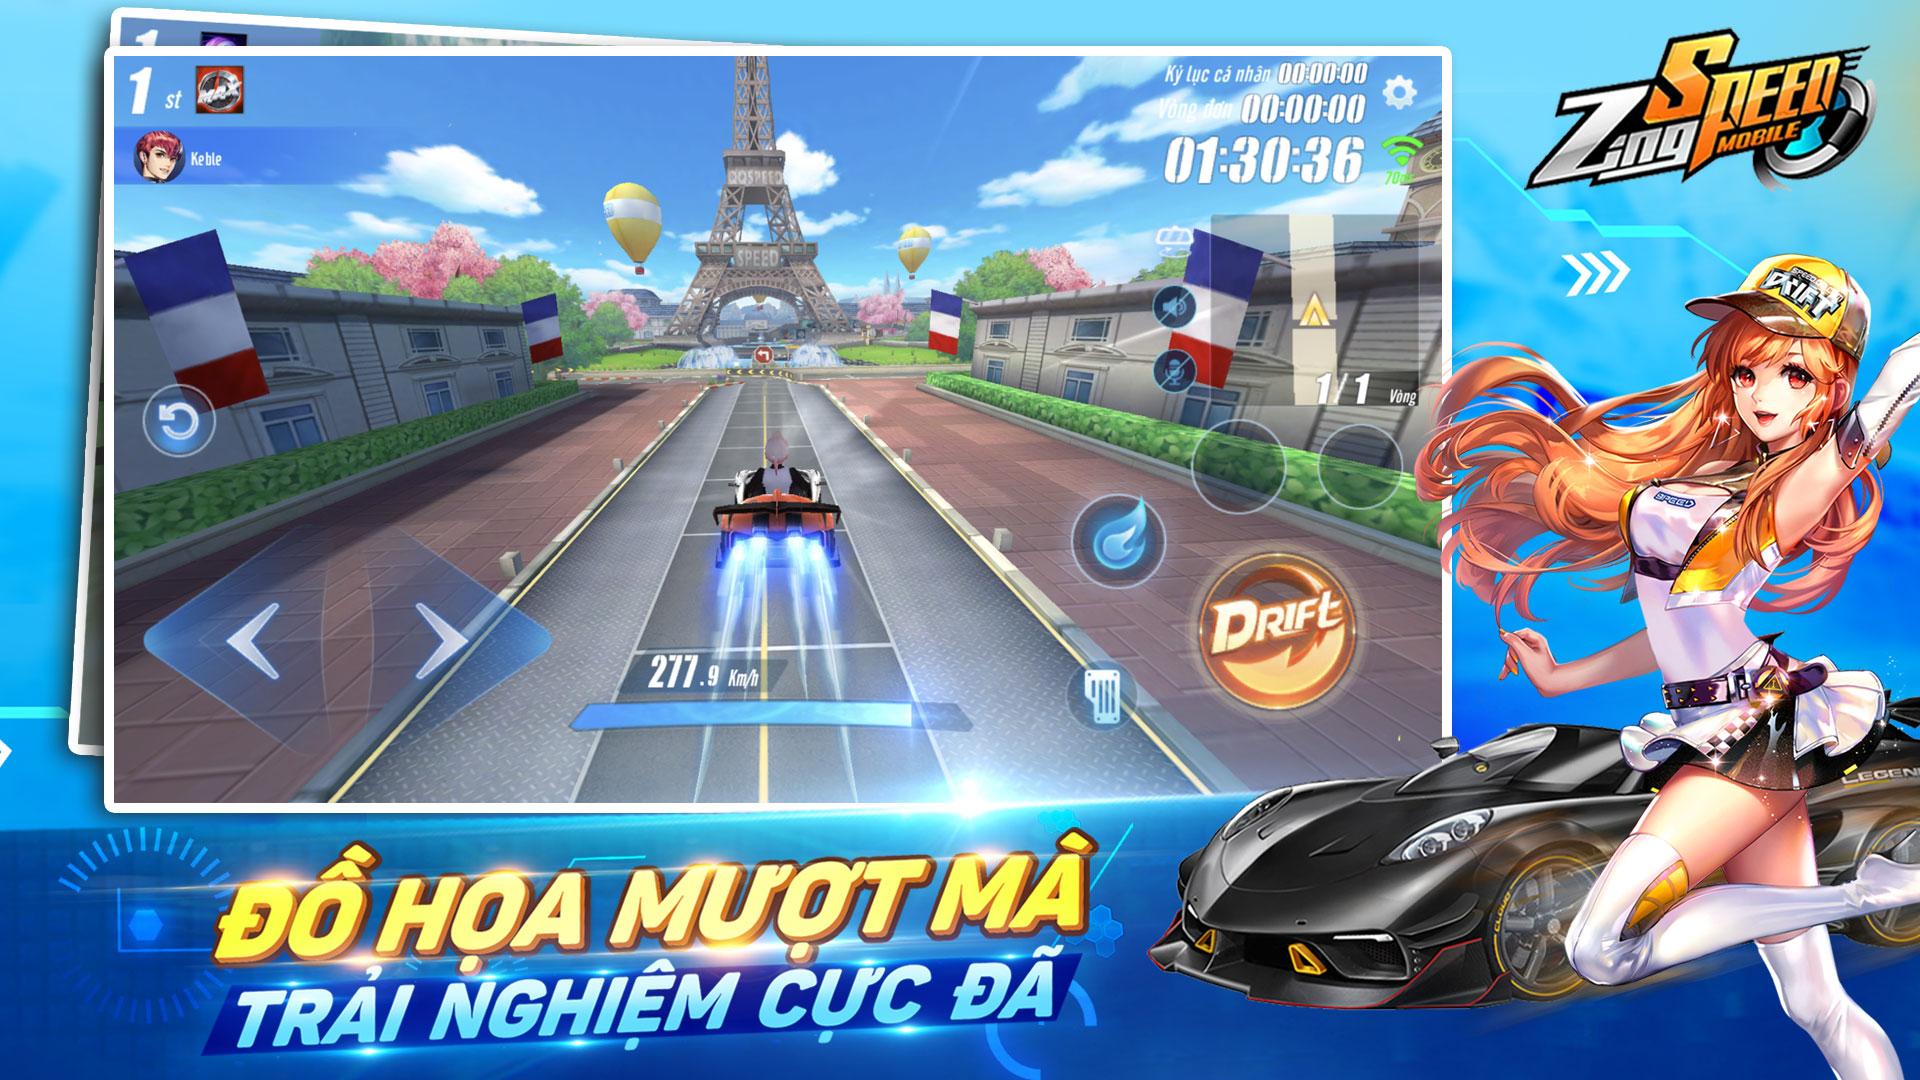 ZingSpeed Mobile for Android - APK Download - 